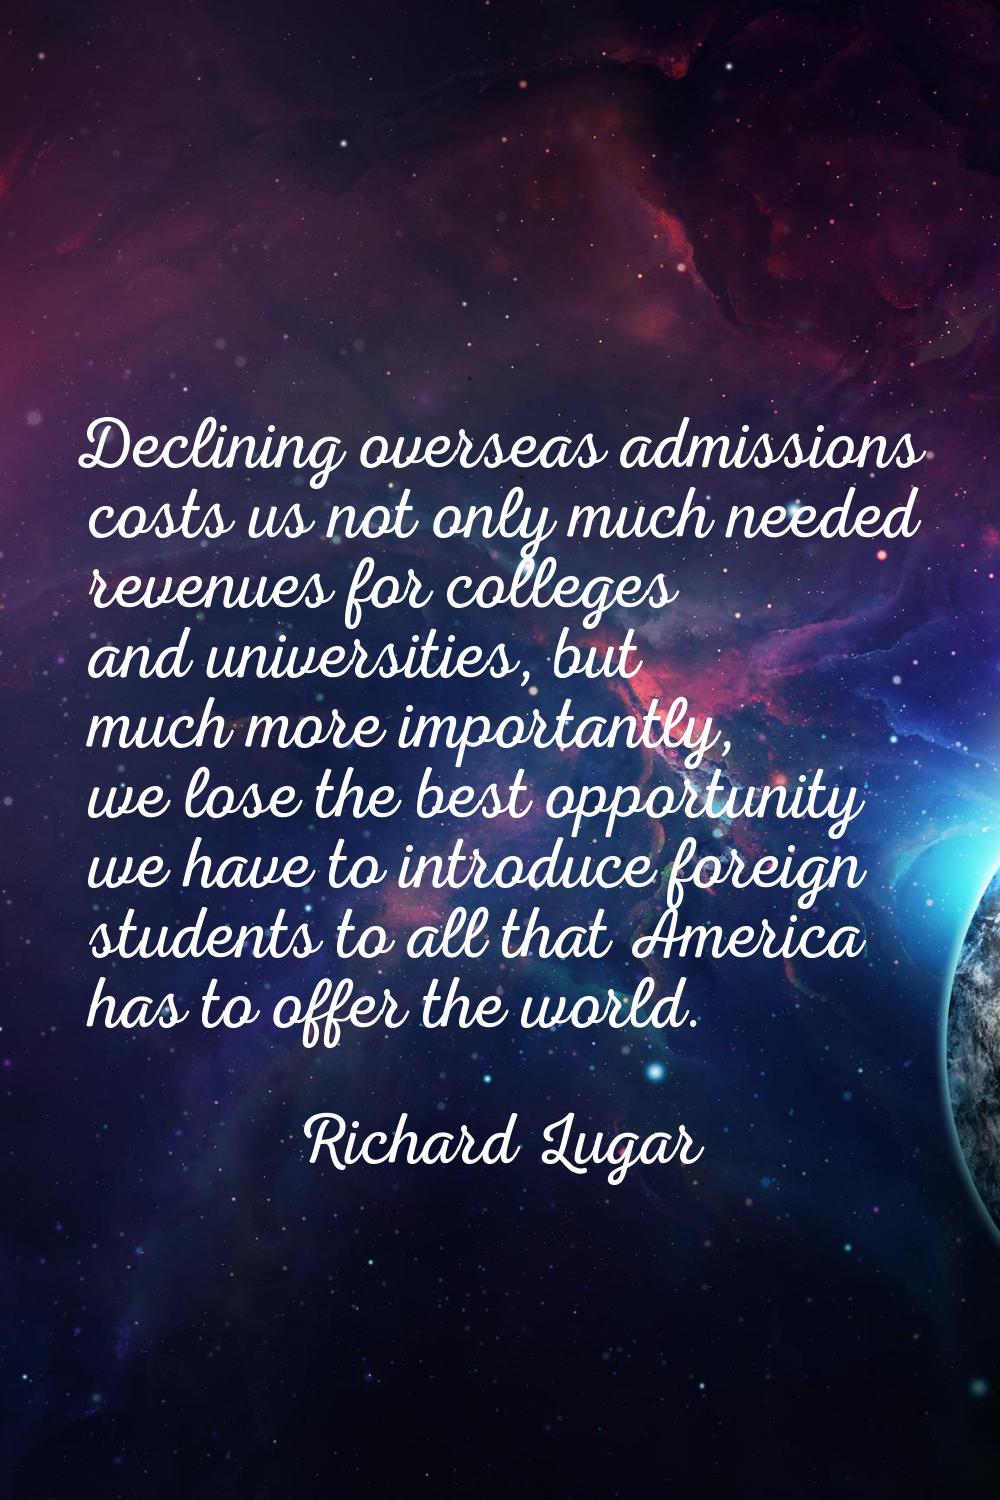 Declining overseas admissions costs us not only much needed revenues for colleges and universities,